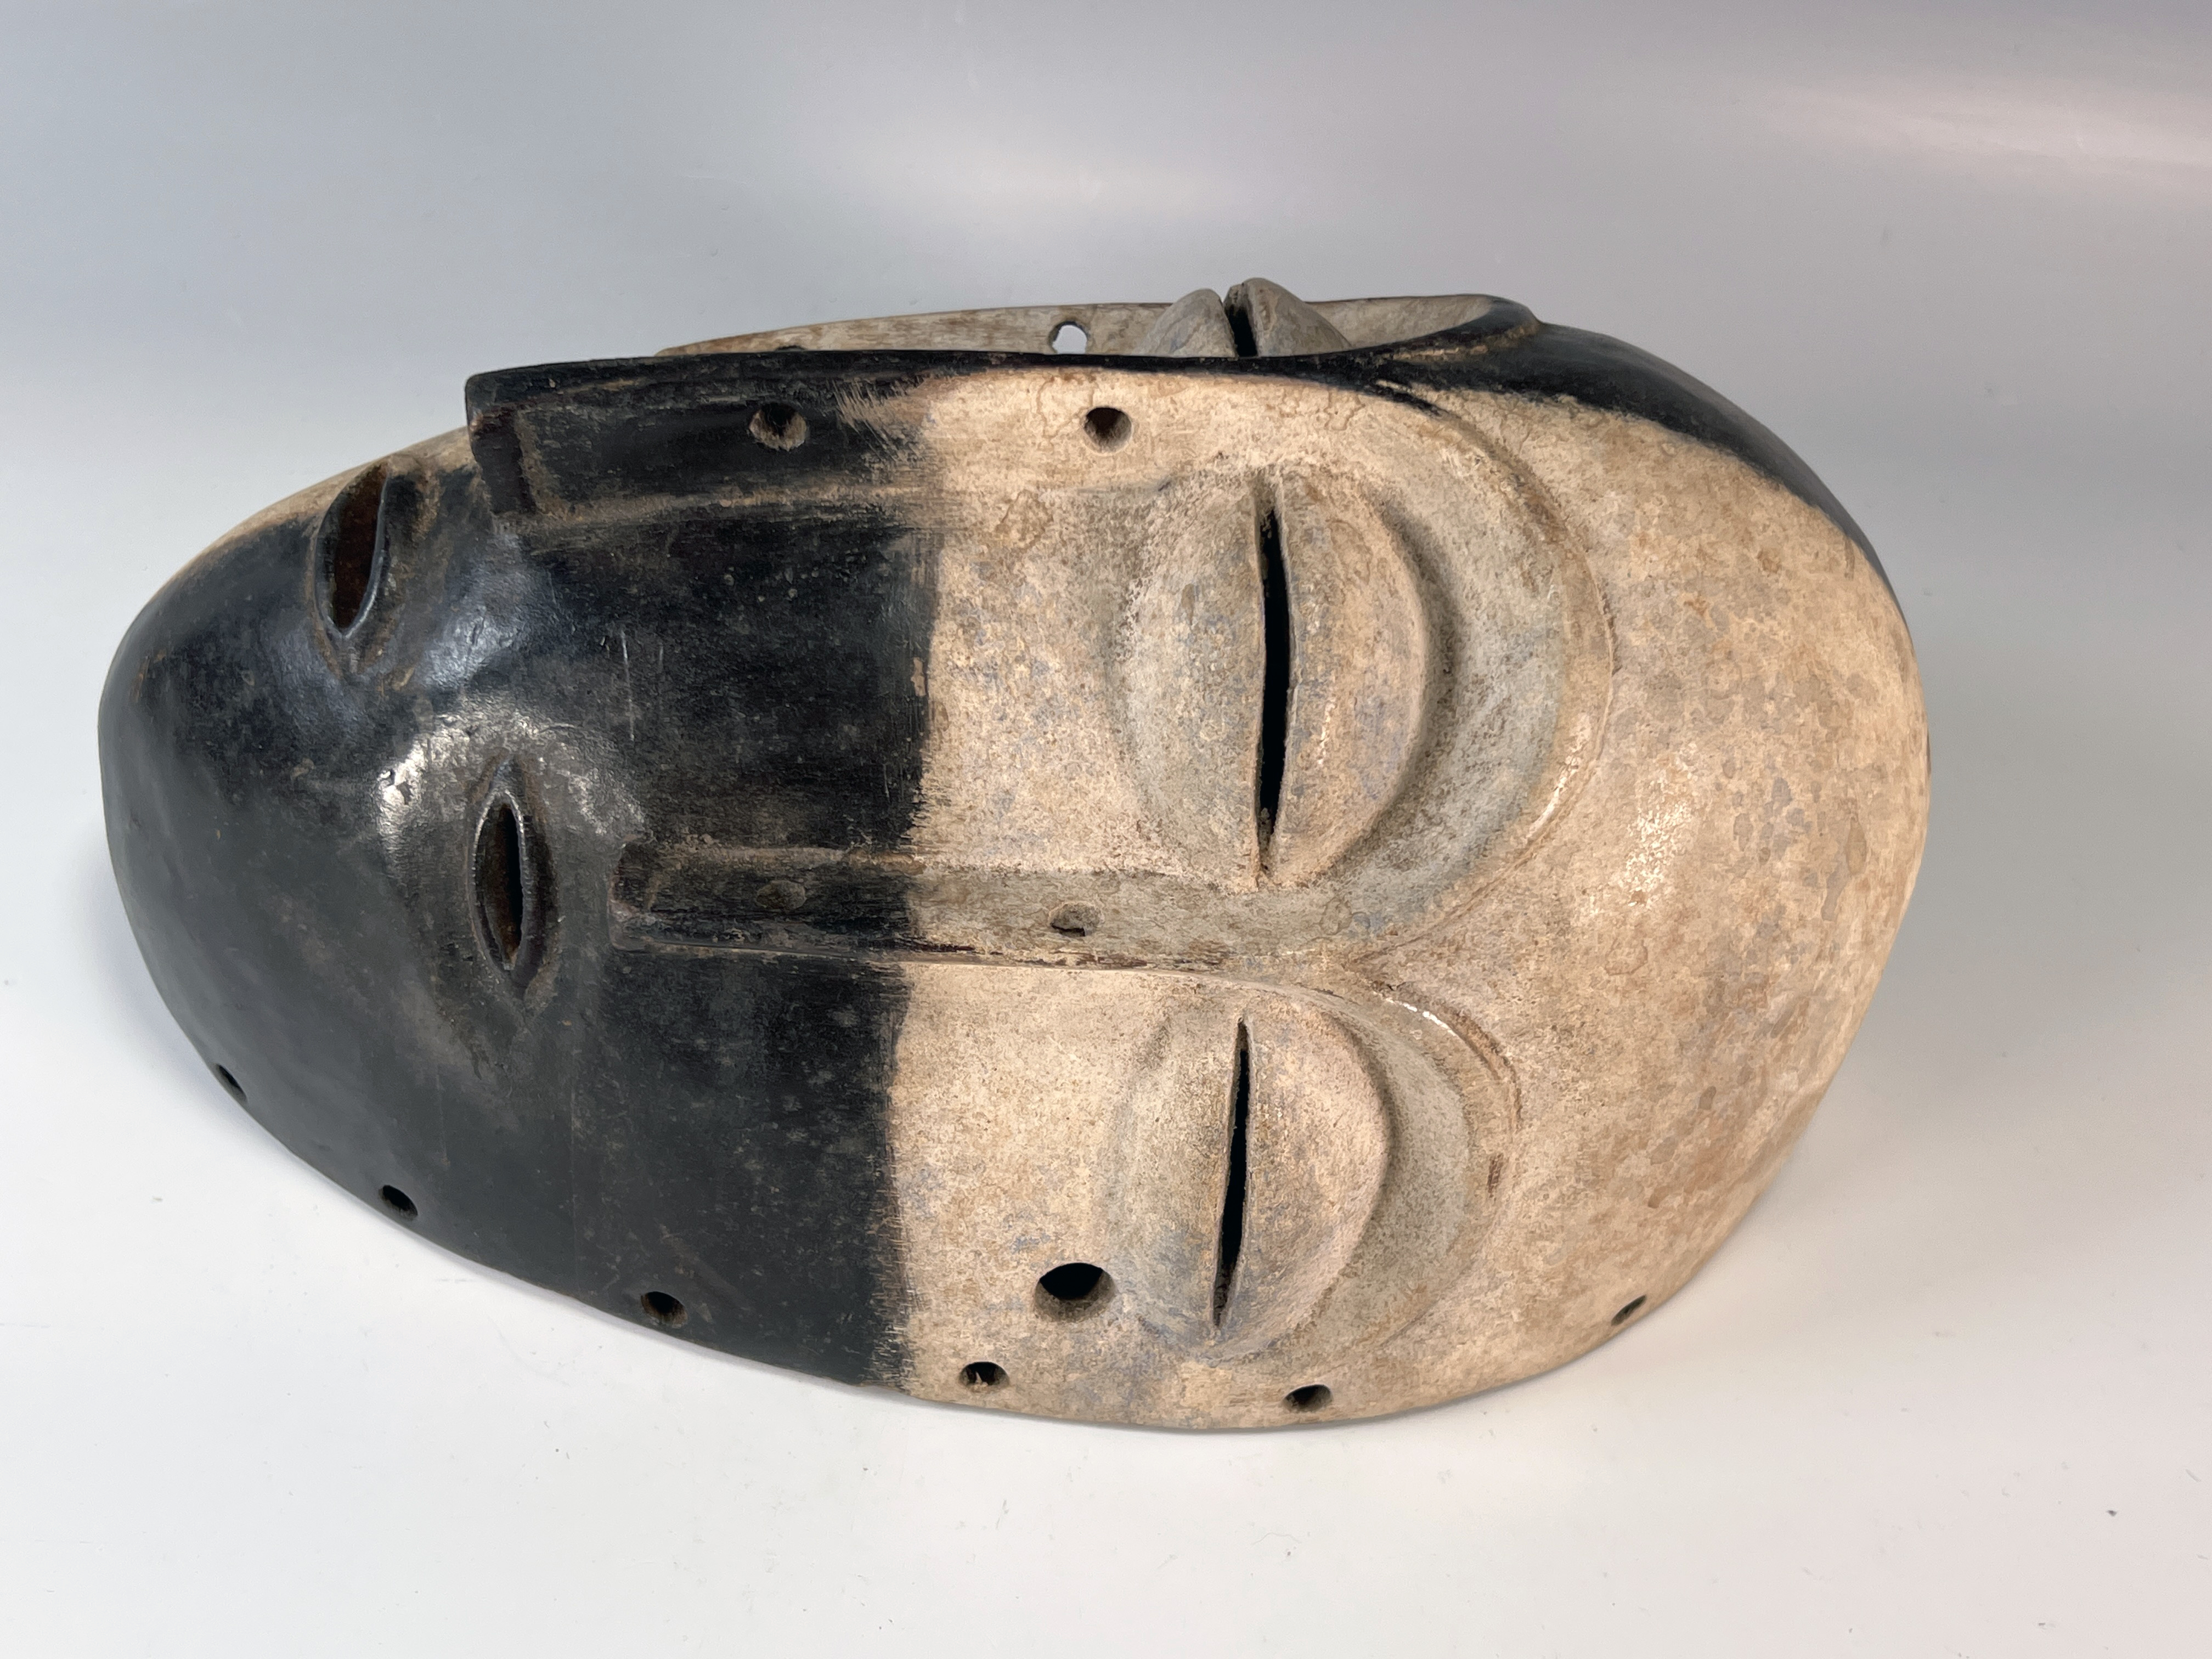 Multiple Faces Mask Lengola Congo Central Africa image 3